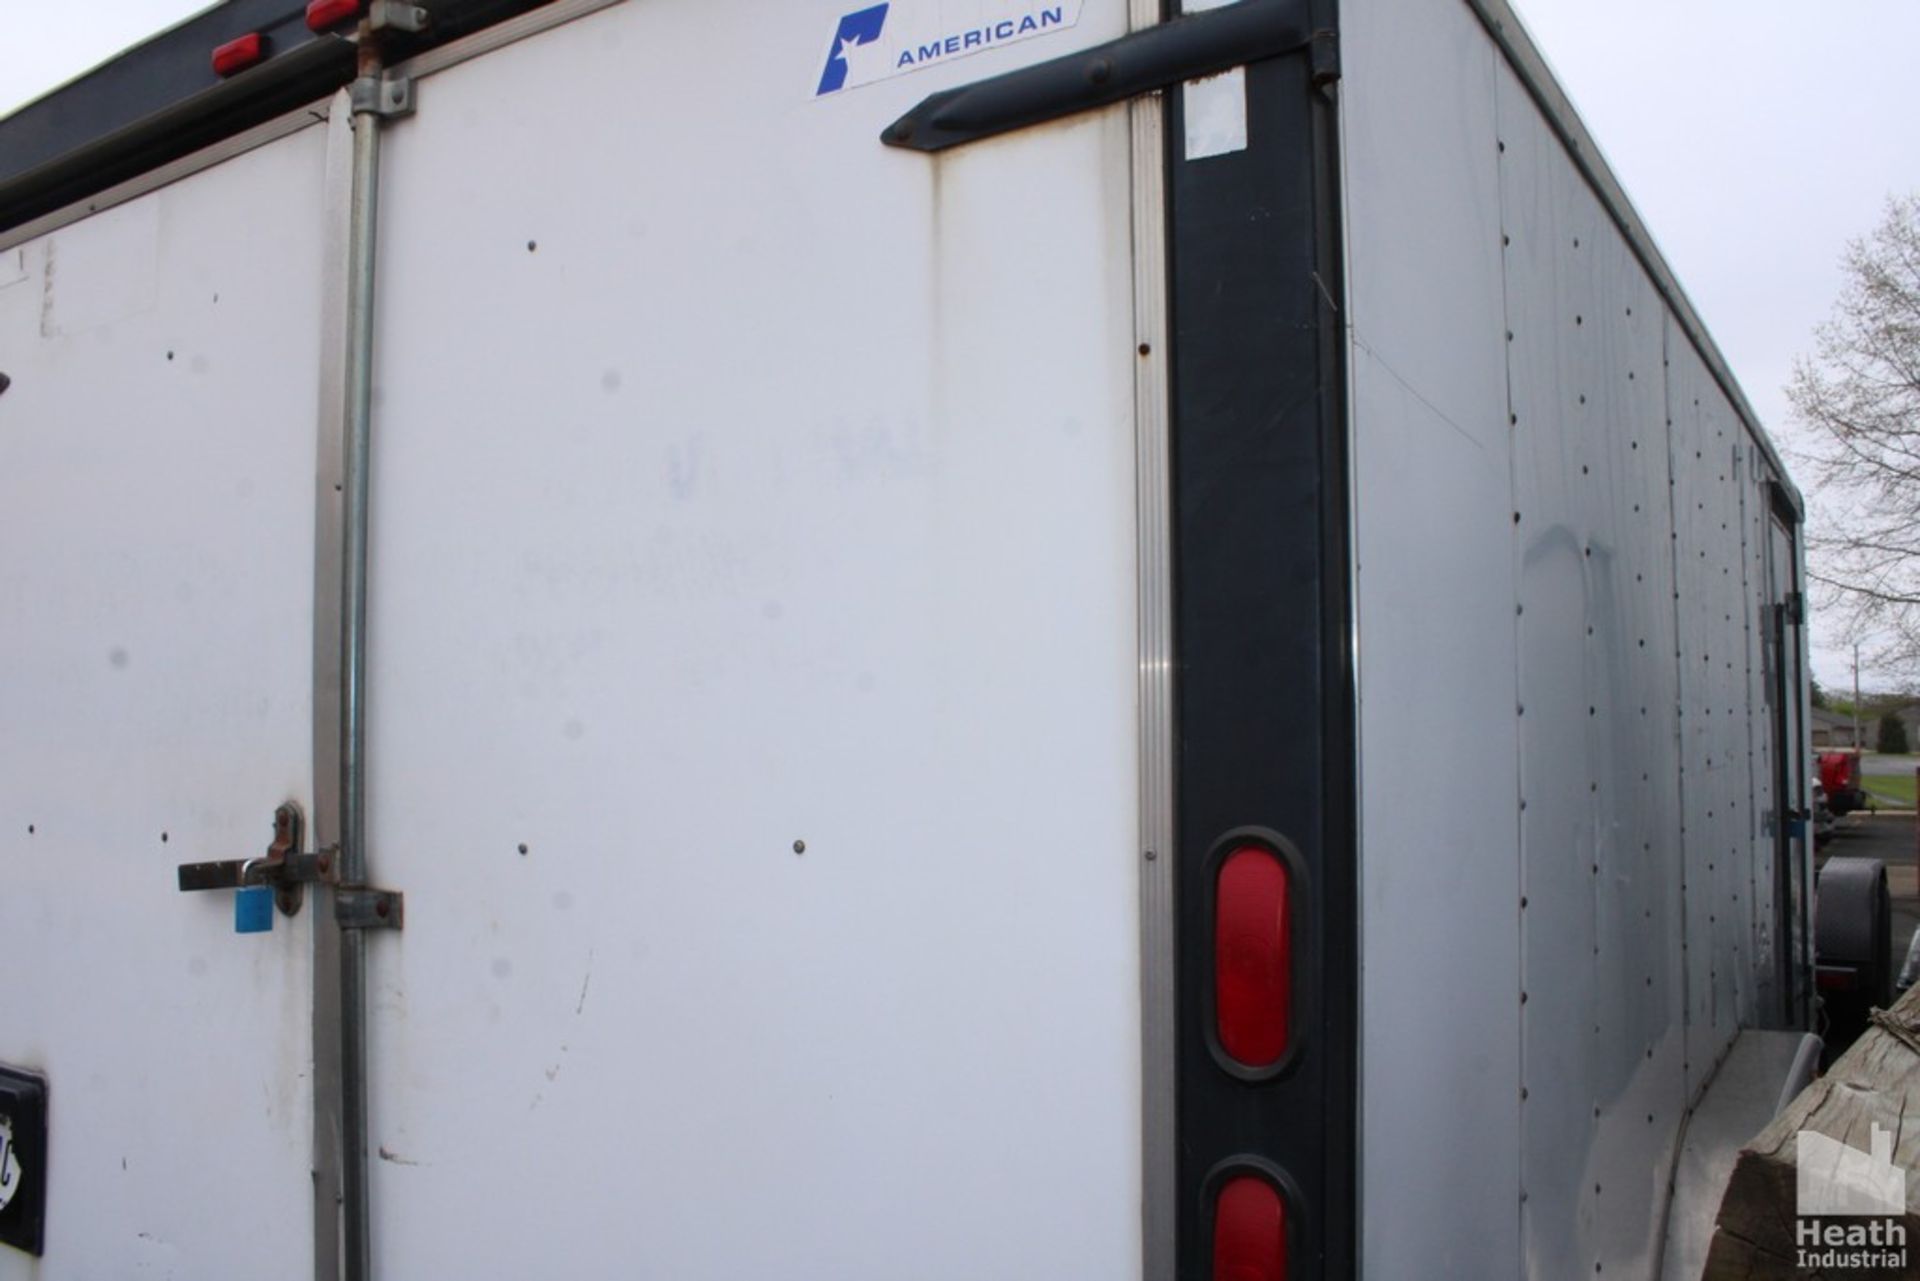 PACE "CARGO SPORT" 18' TANDEM AXLE ENCLOSED CARGO TRAILER - Image 3 of 3